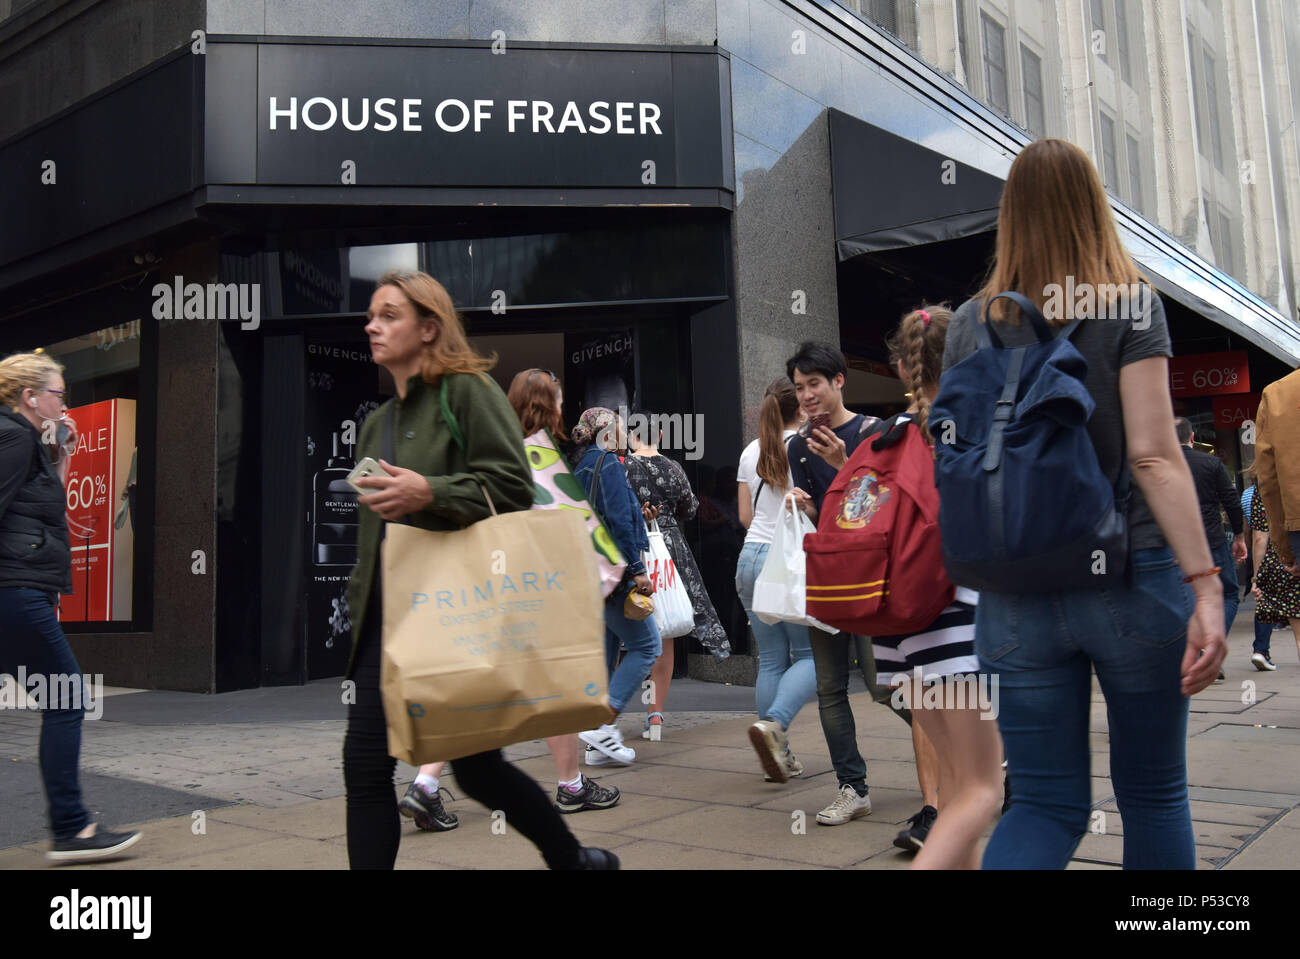 Shoppers and tourists amd a woman with a Primark shopping bag walk past the department store House of Fraser on Oxford Street in central London. The c Stock Photo